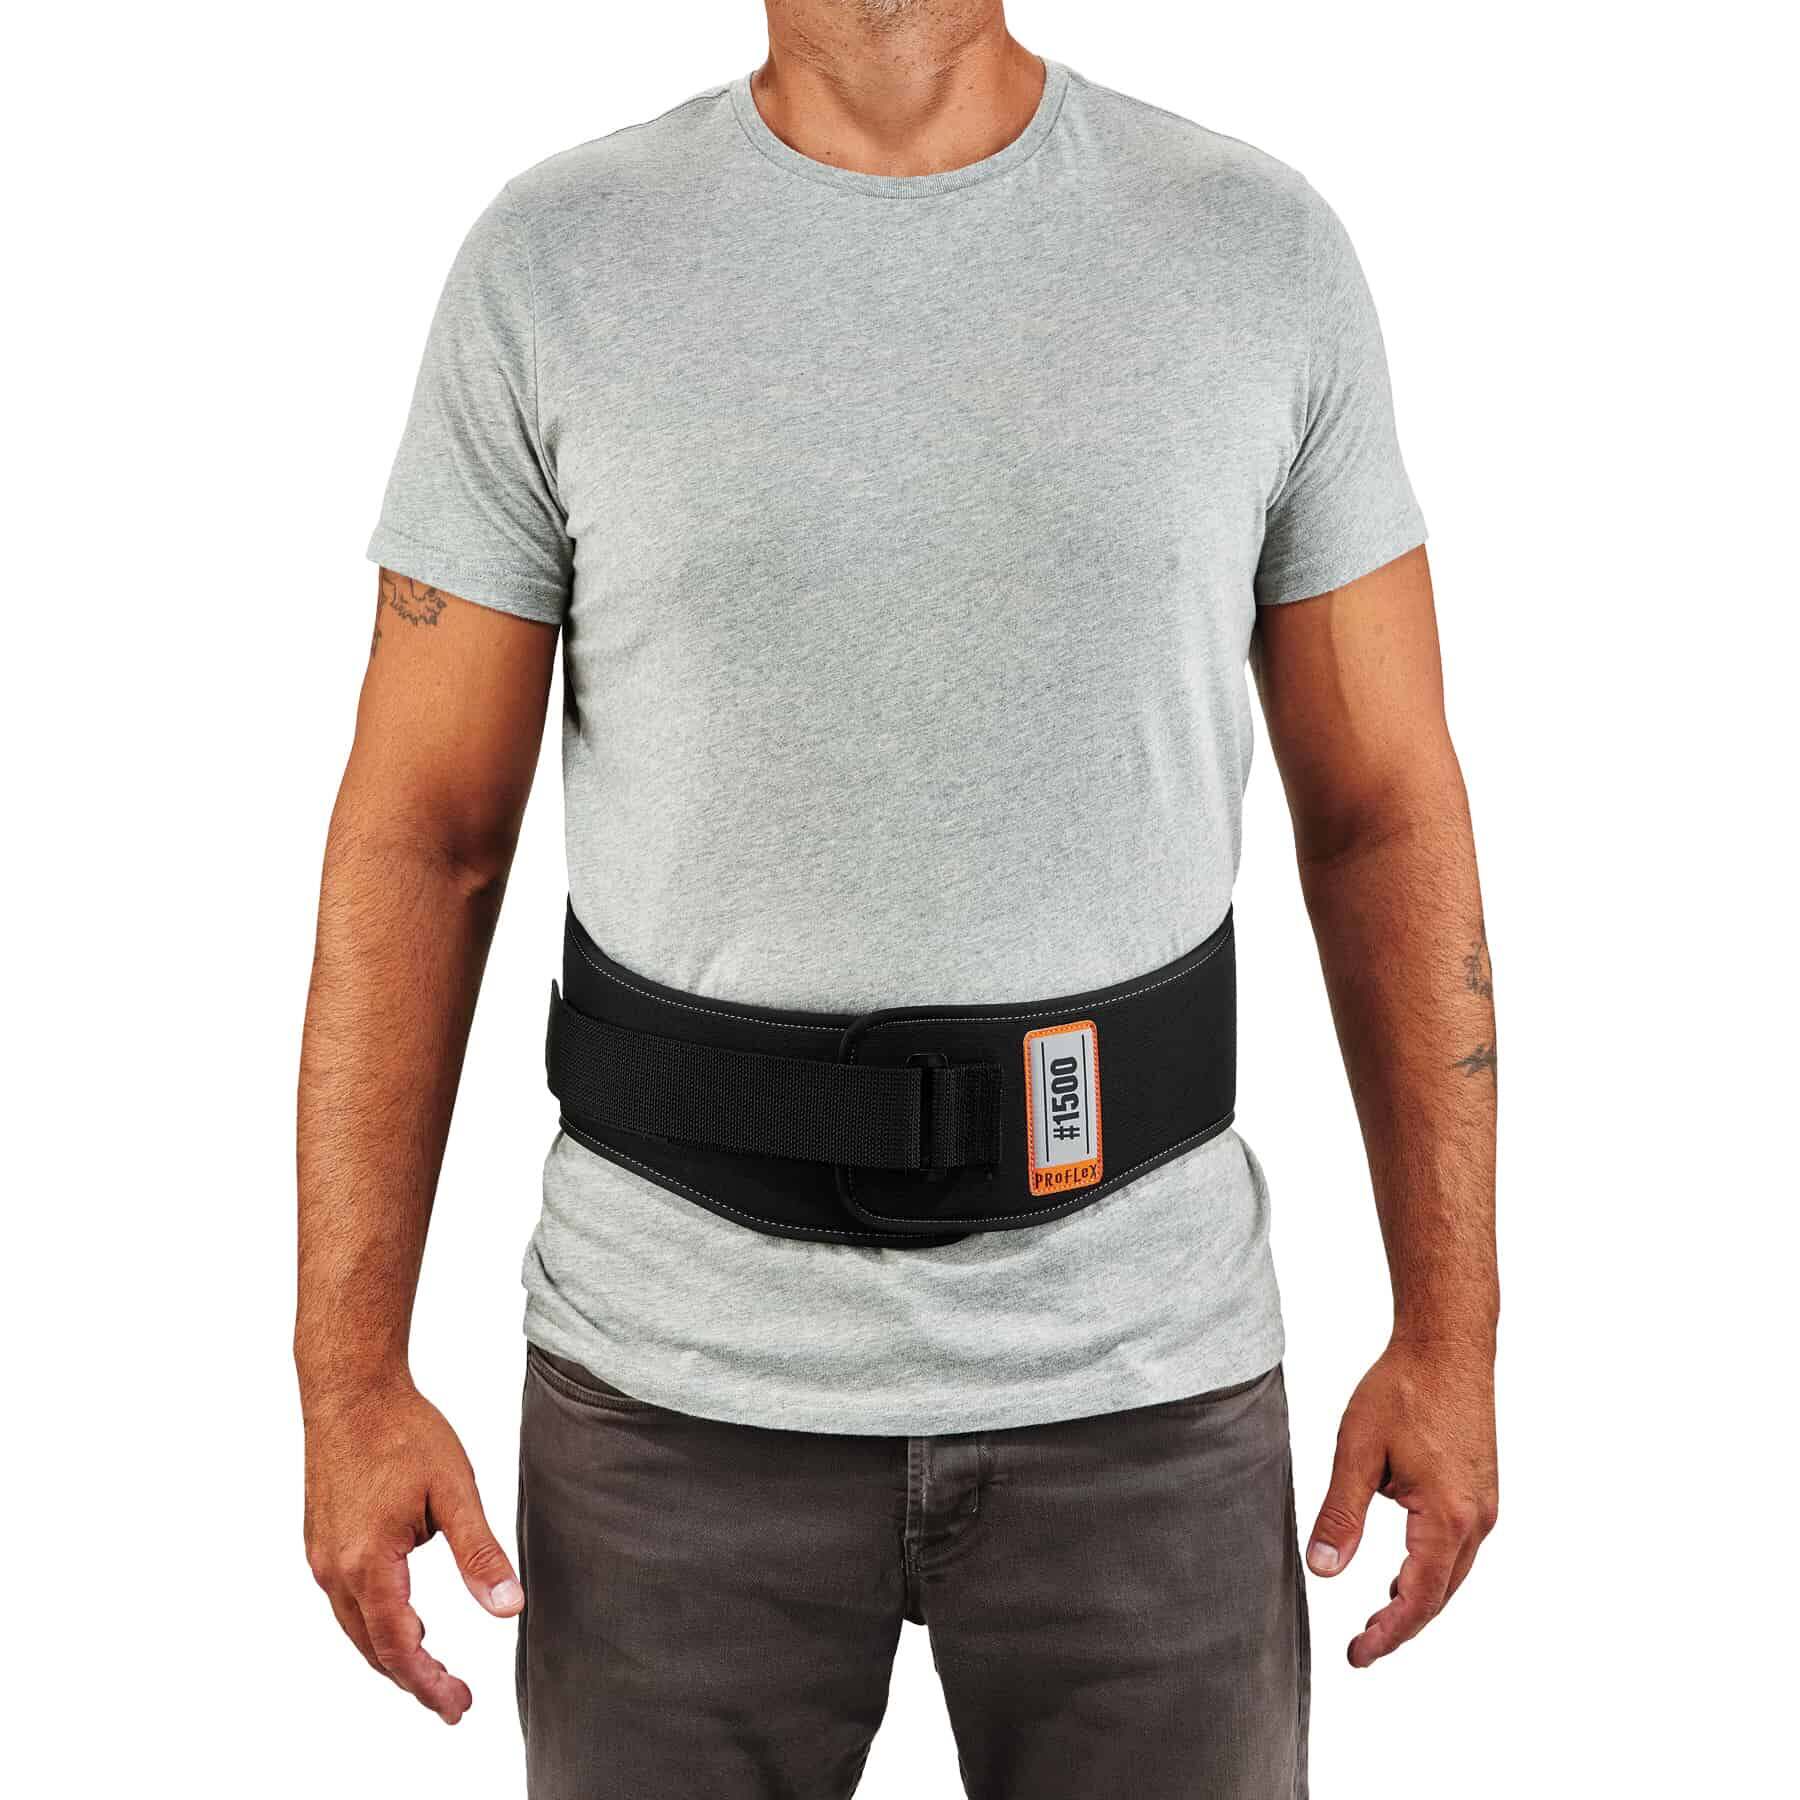 Back Brace for Women with 12 Stays, Extra-Wide Back Support Belt